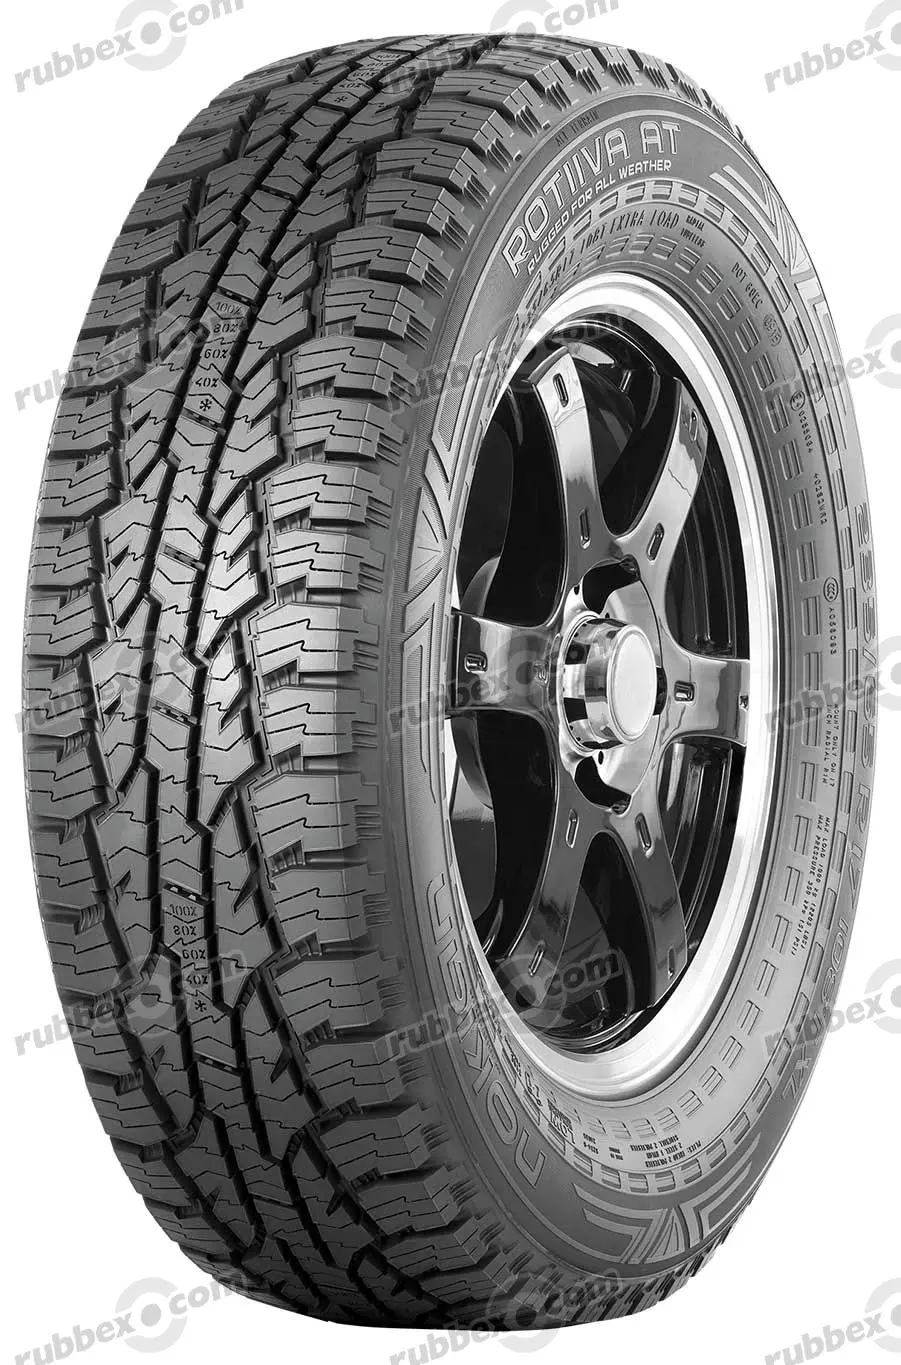 Nokian Tyres Nokian Rotiiva A/T 235/85 R16 120R/116R